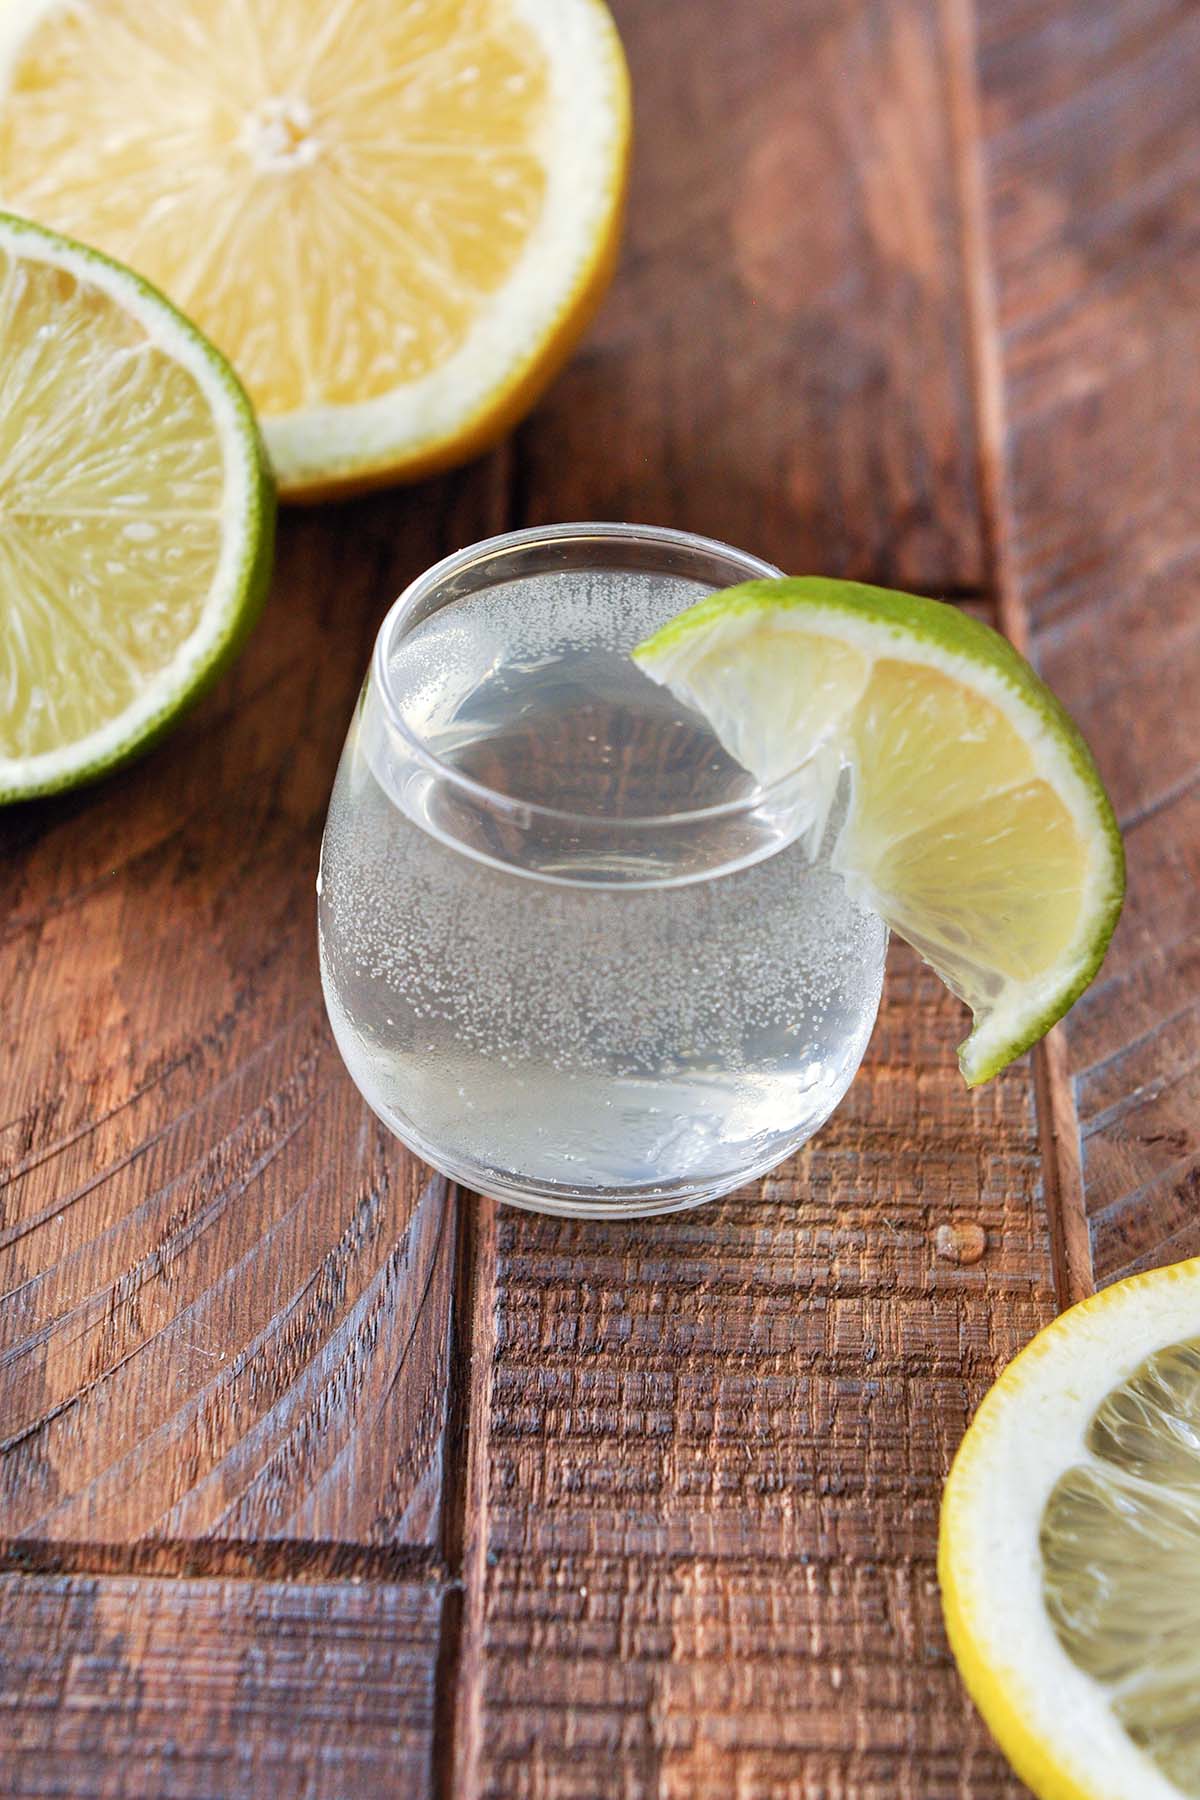 A single shot glass of the white tea shot with a lime wedge on the side of the glass and lemon and lime halves in the background.